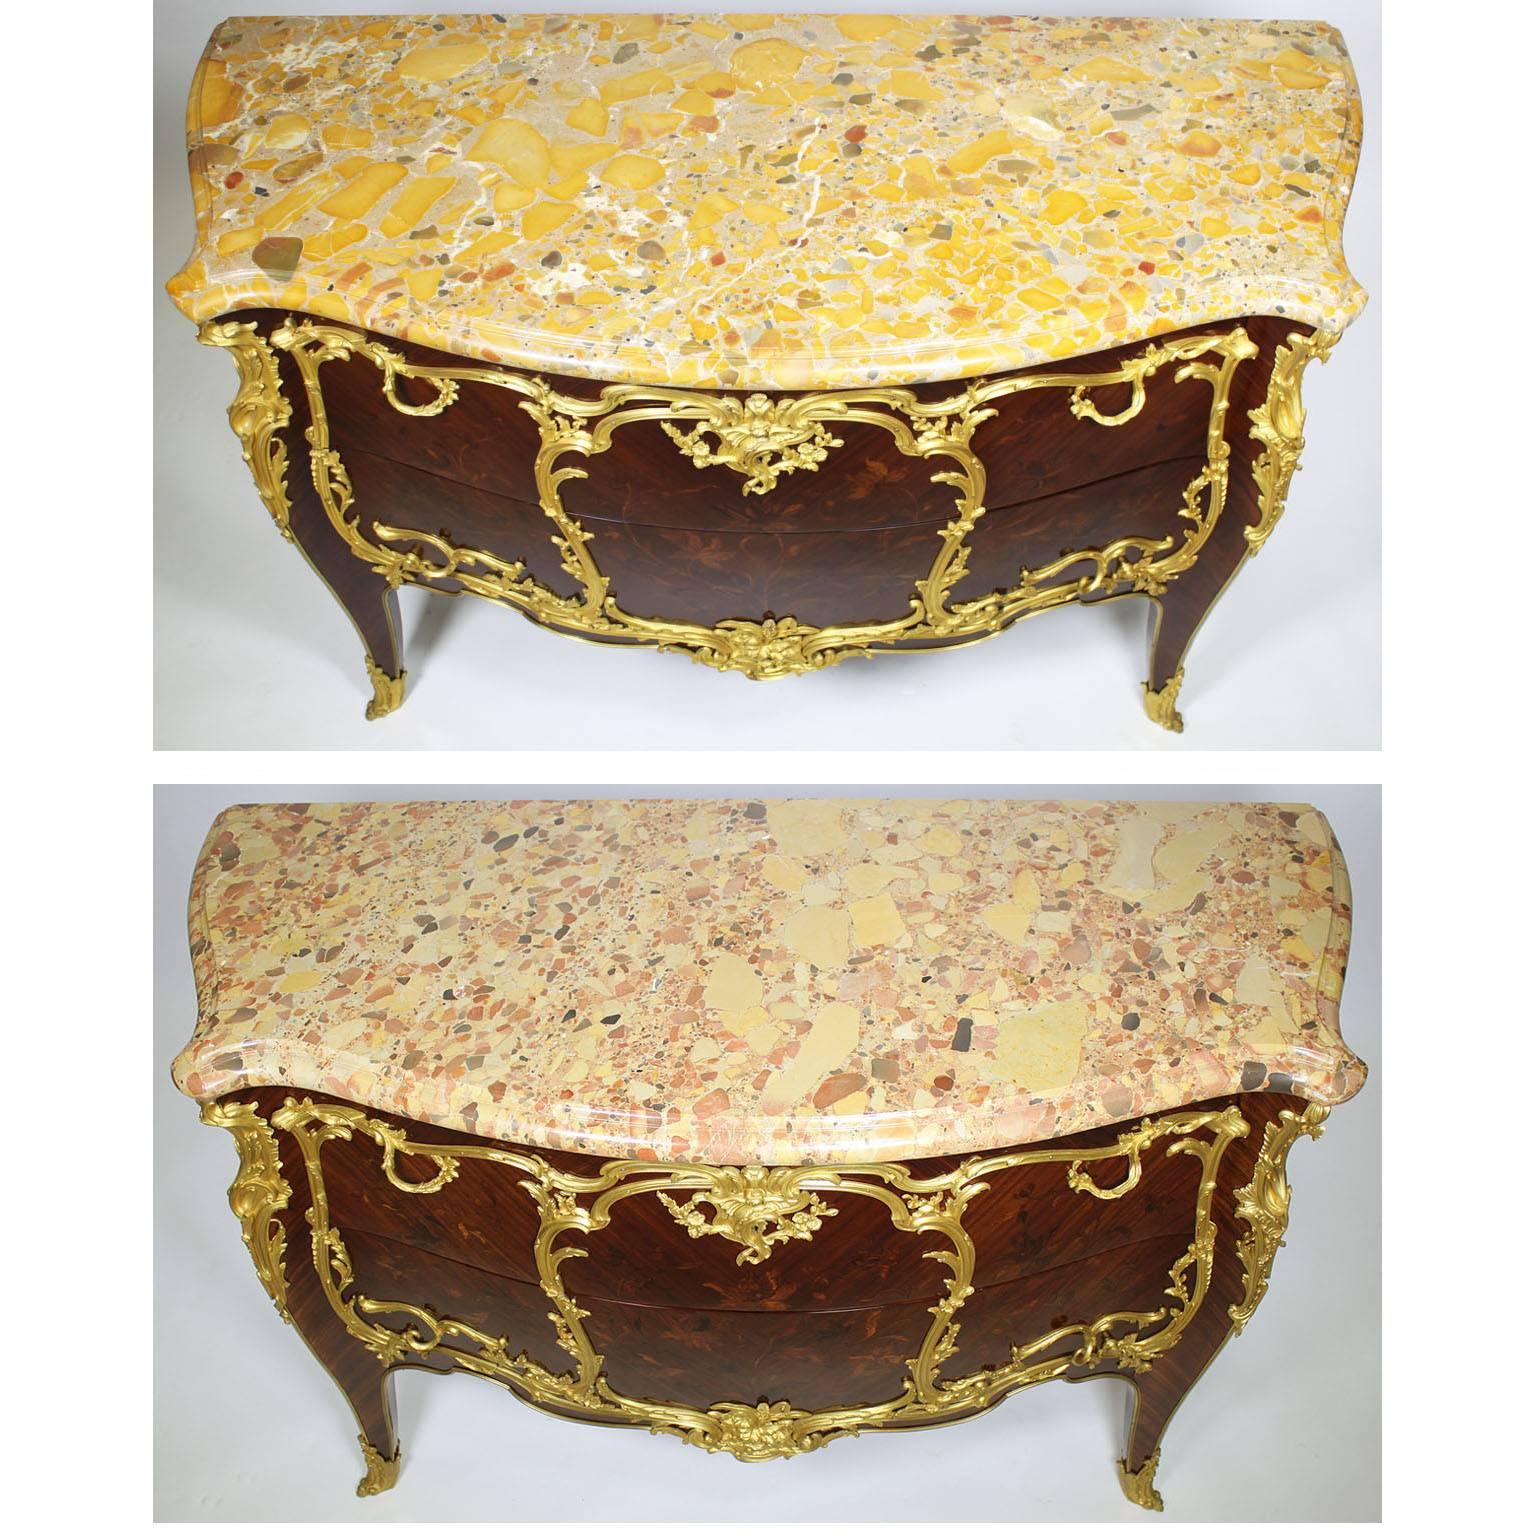 Fine Pair of 19th Century Louis XV Style Gilt Bronze-Mounted Commodes For Sale 3